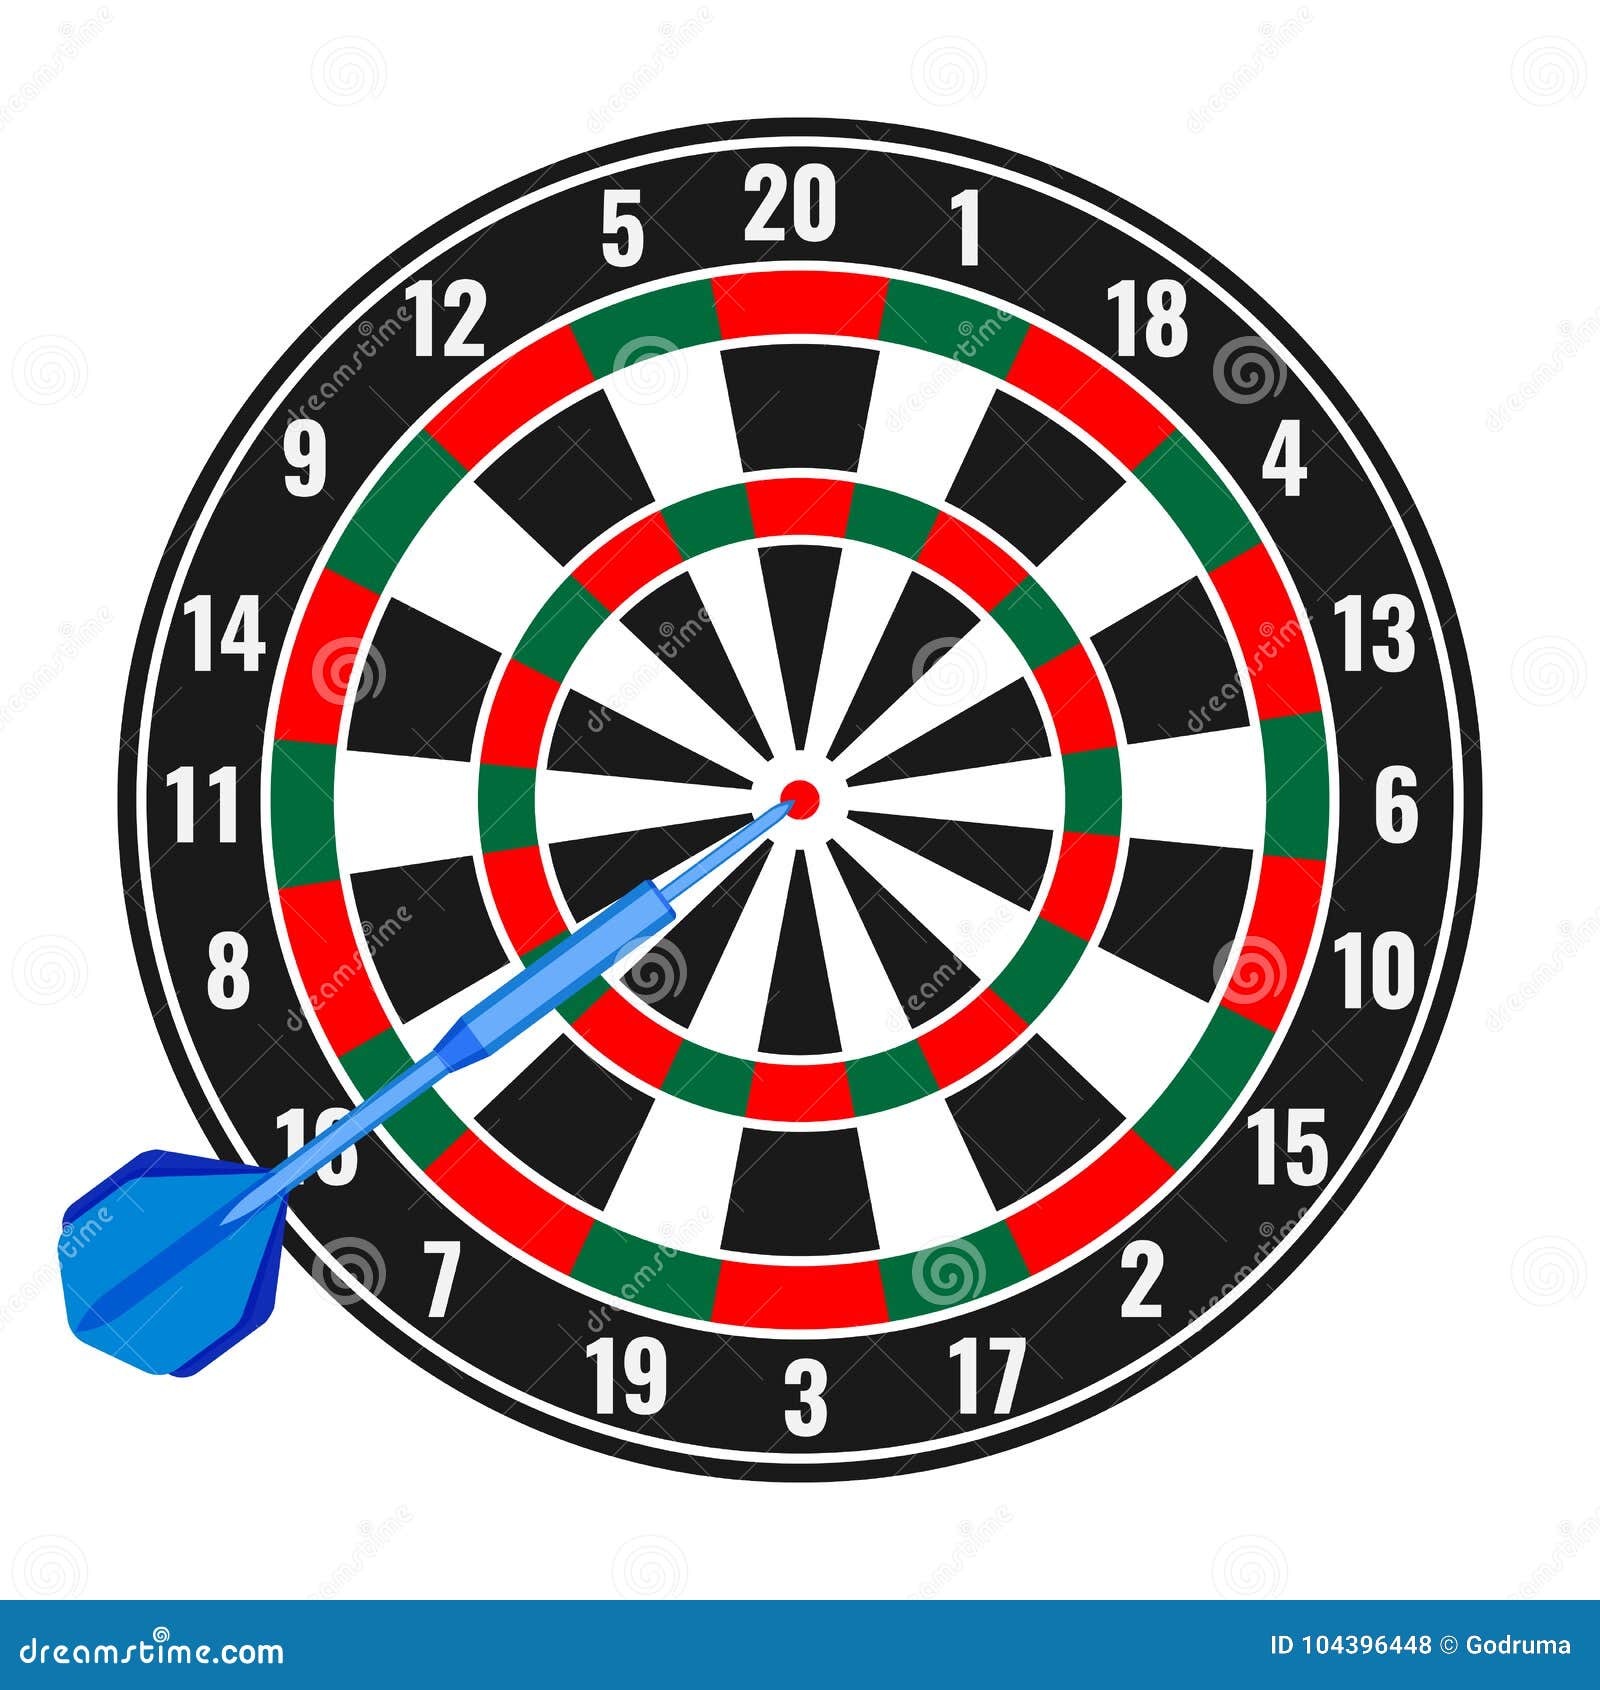 Dartboard with Small Missile Arrow in Goal Realistic Vector Stock ...